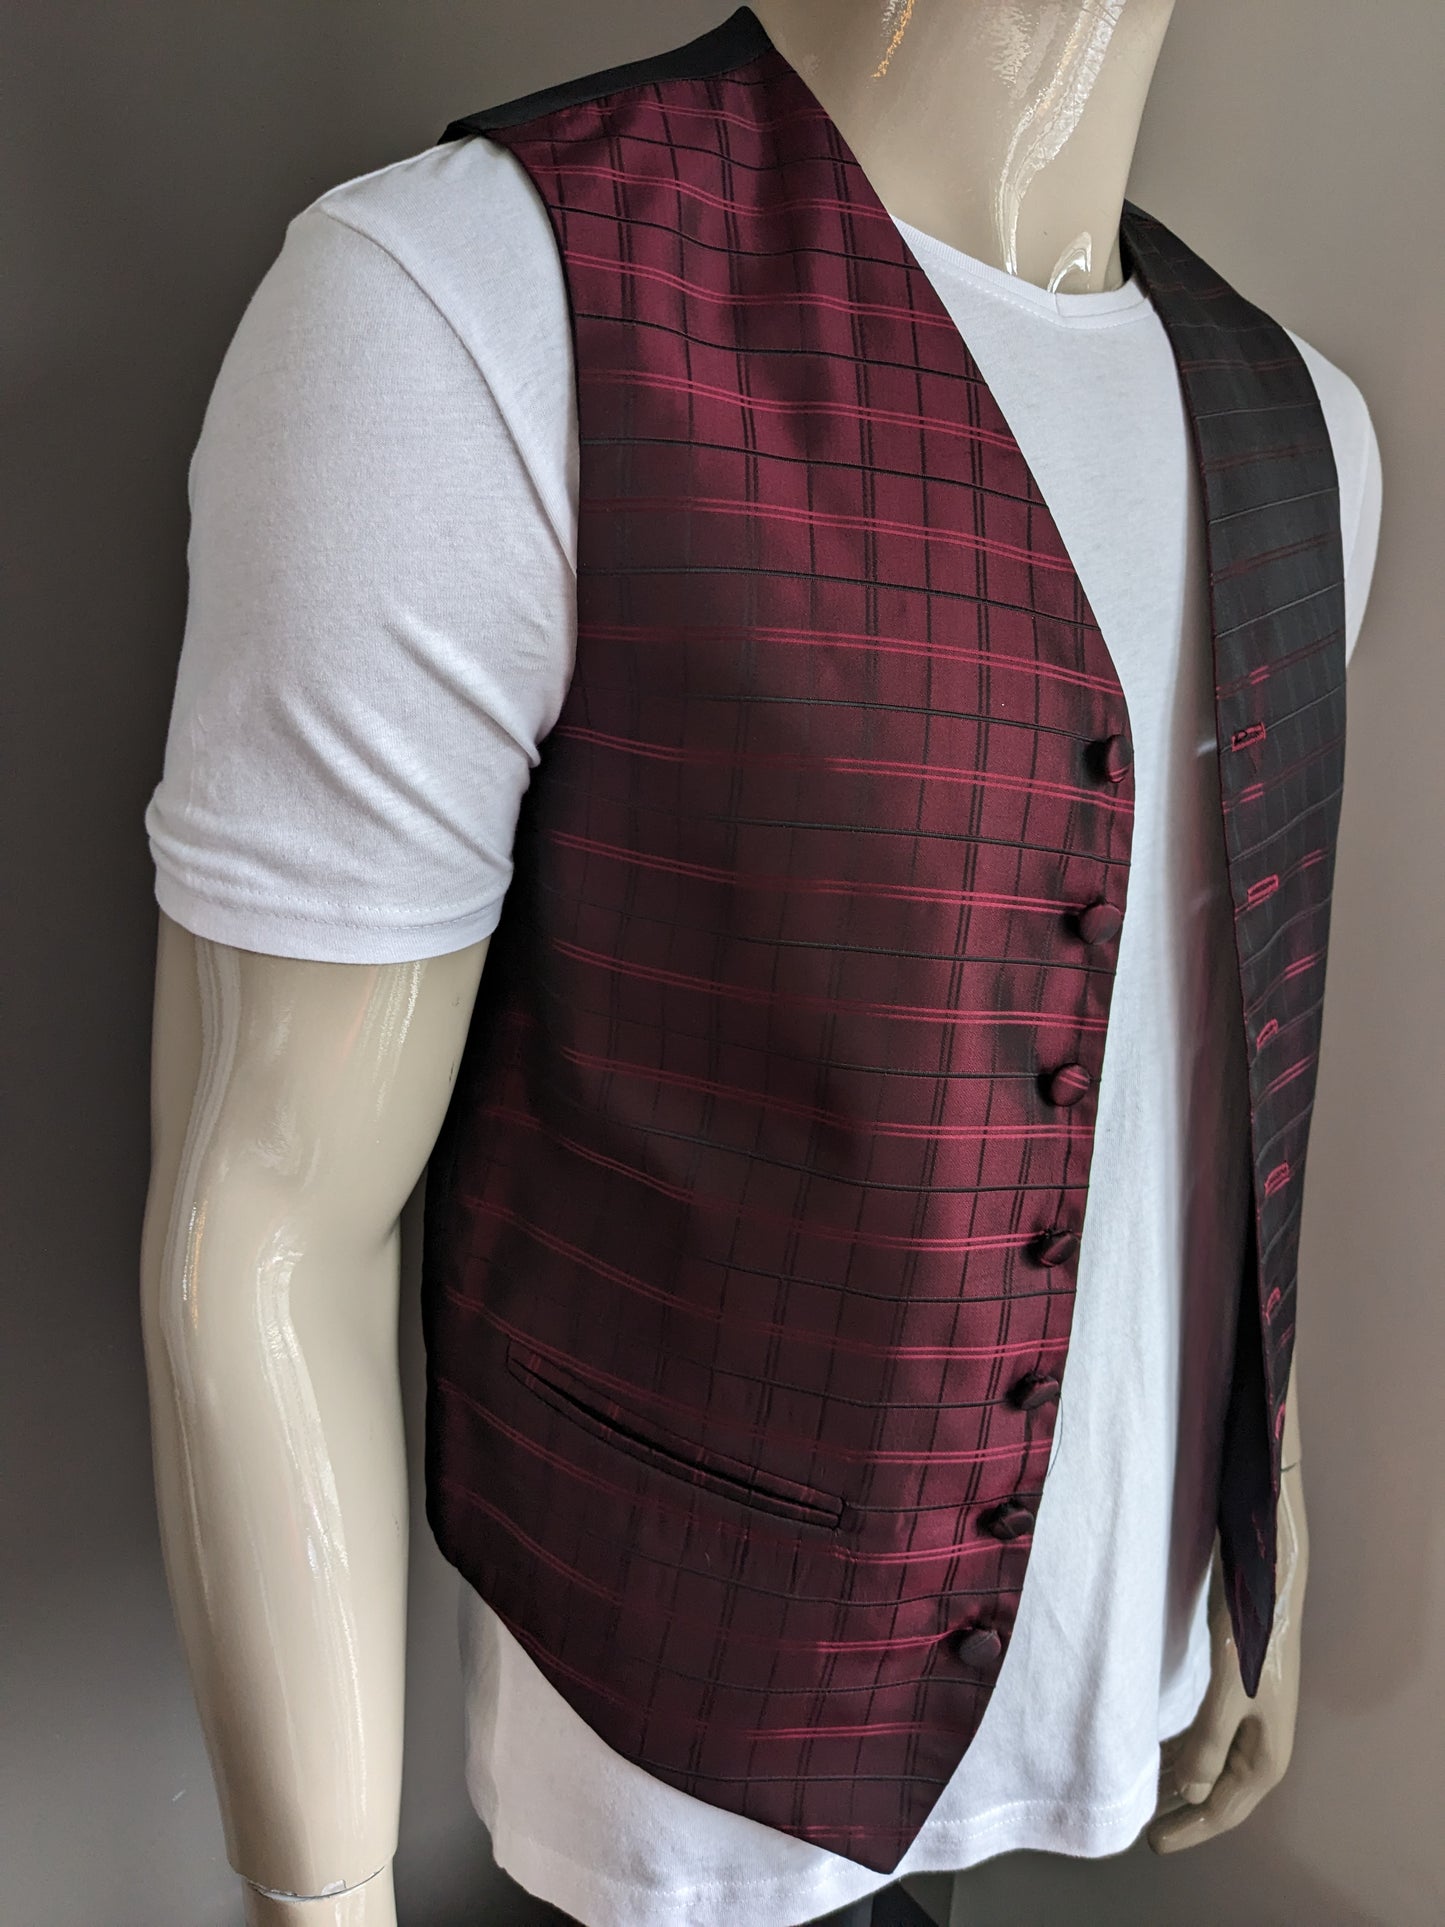 Young's waistcoat. Bordeaux black glossy checkered motif. Size S.